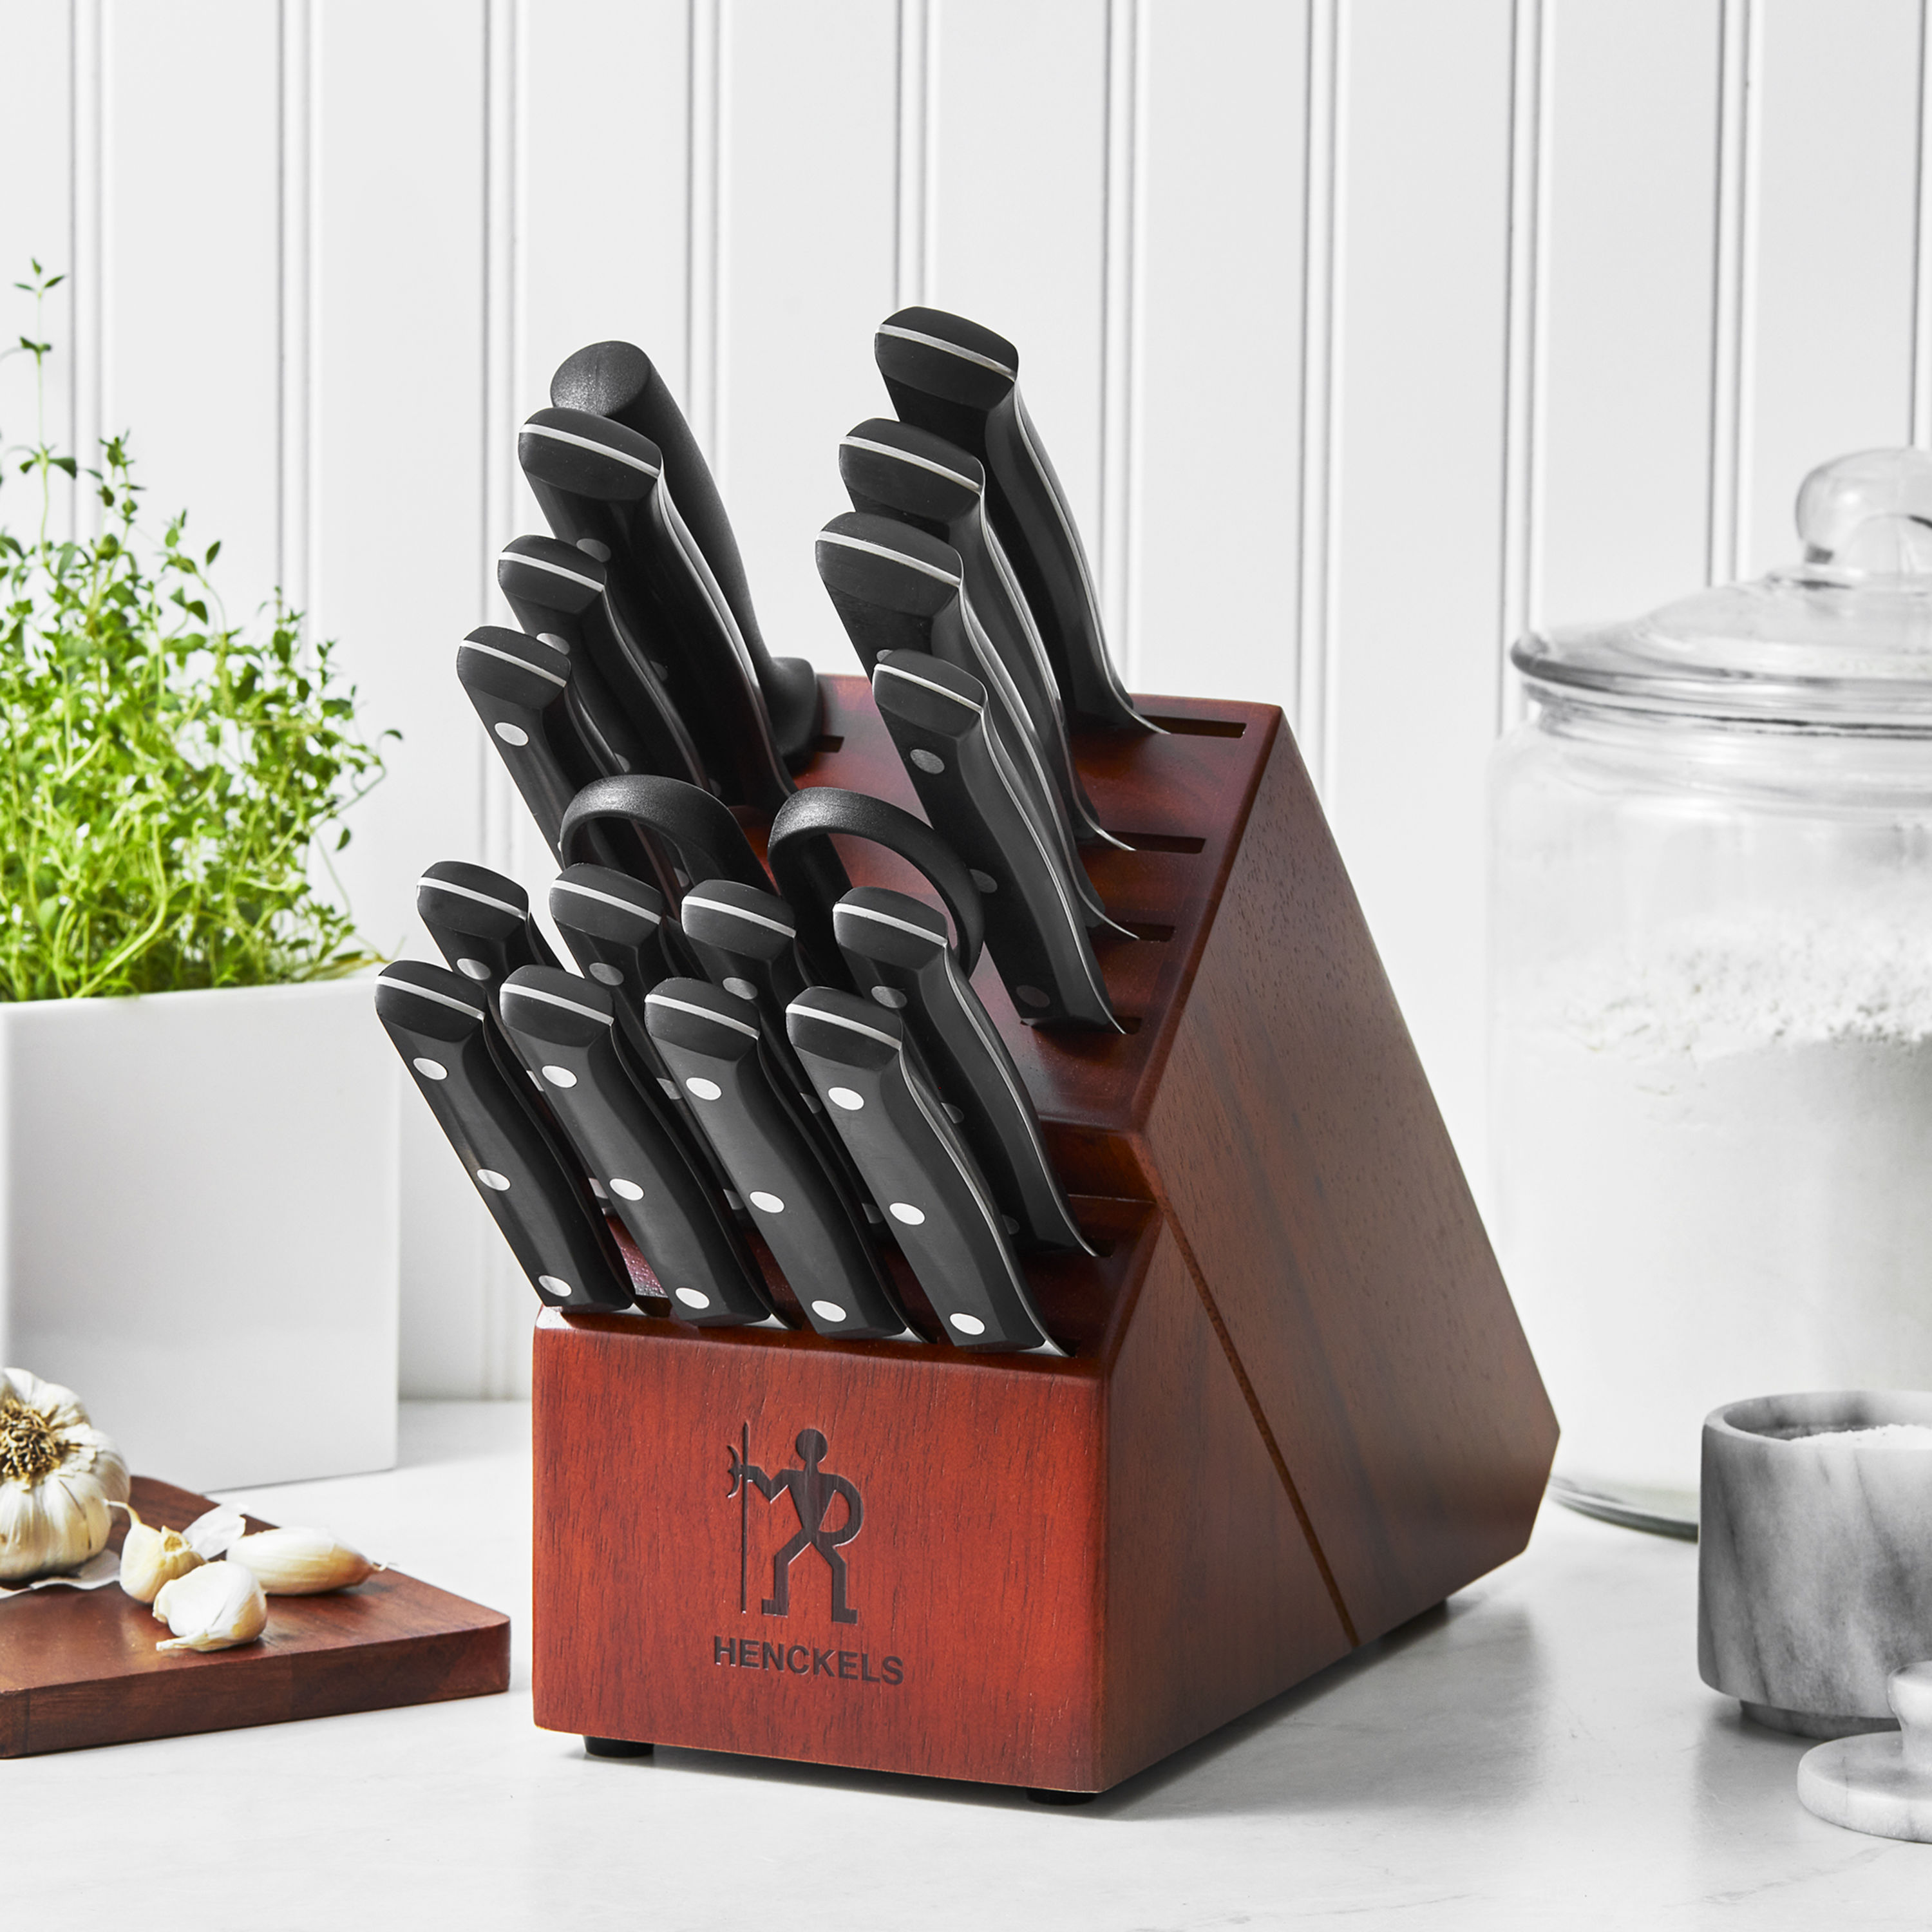  HENCKELS Premium Quality 20-Piece Knife Set with Block,  Razor-Sharp, German Engineered Knife Informed by over 100 Years of  Masterful Knife Making, Lightweight and Strong, Dark Brown: Home & Kitchen